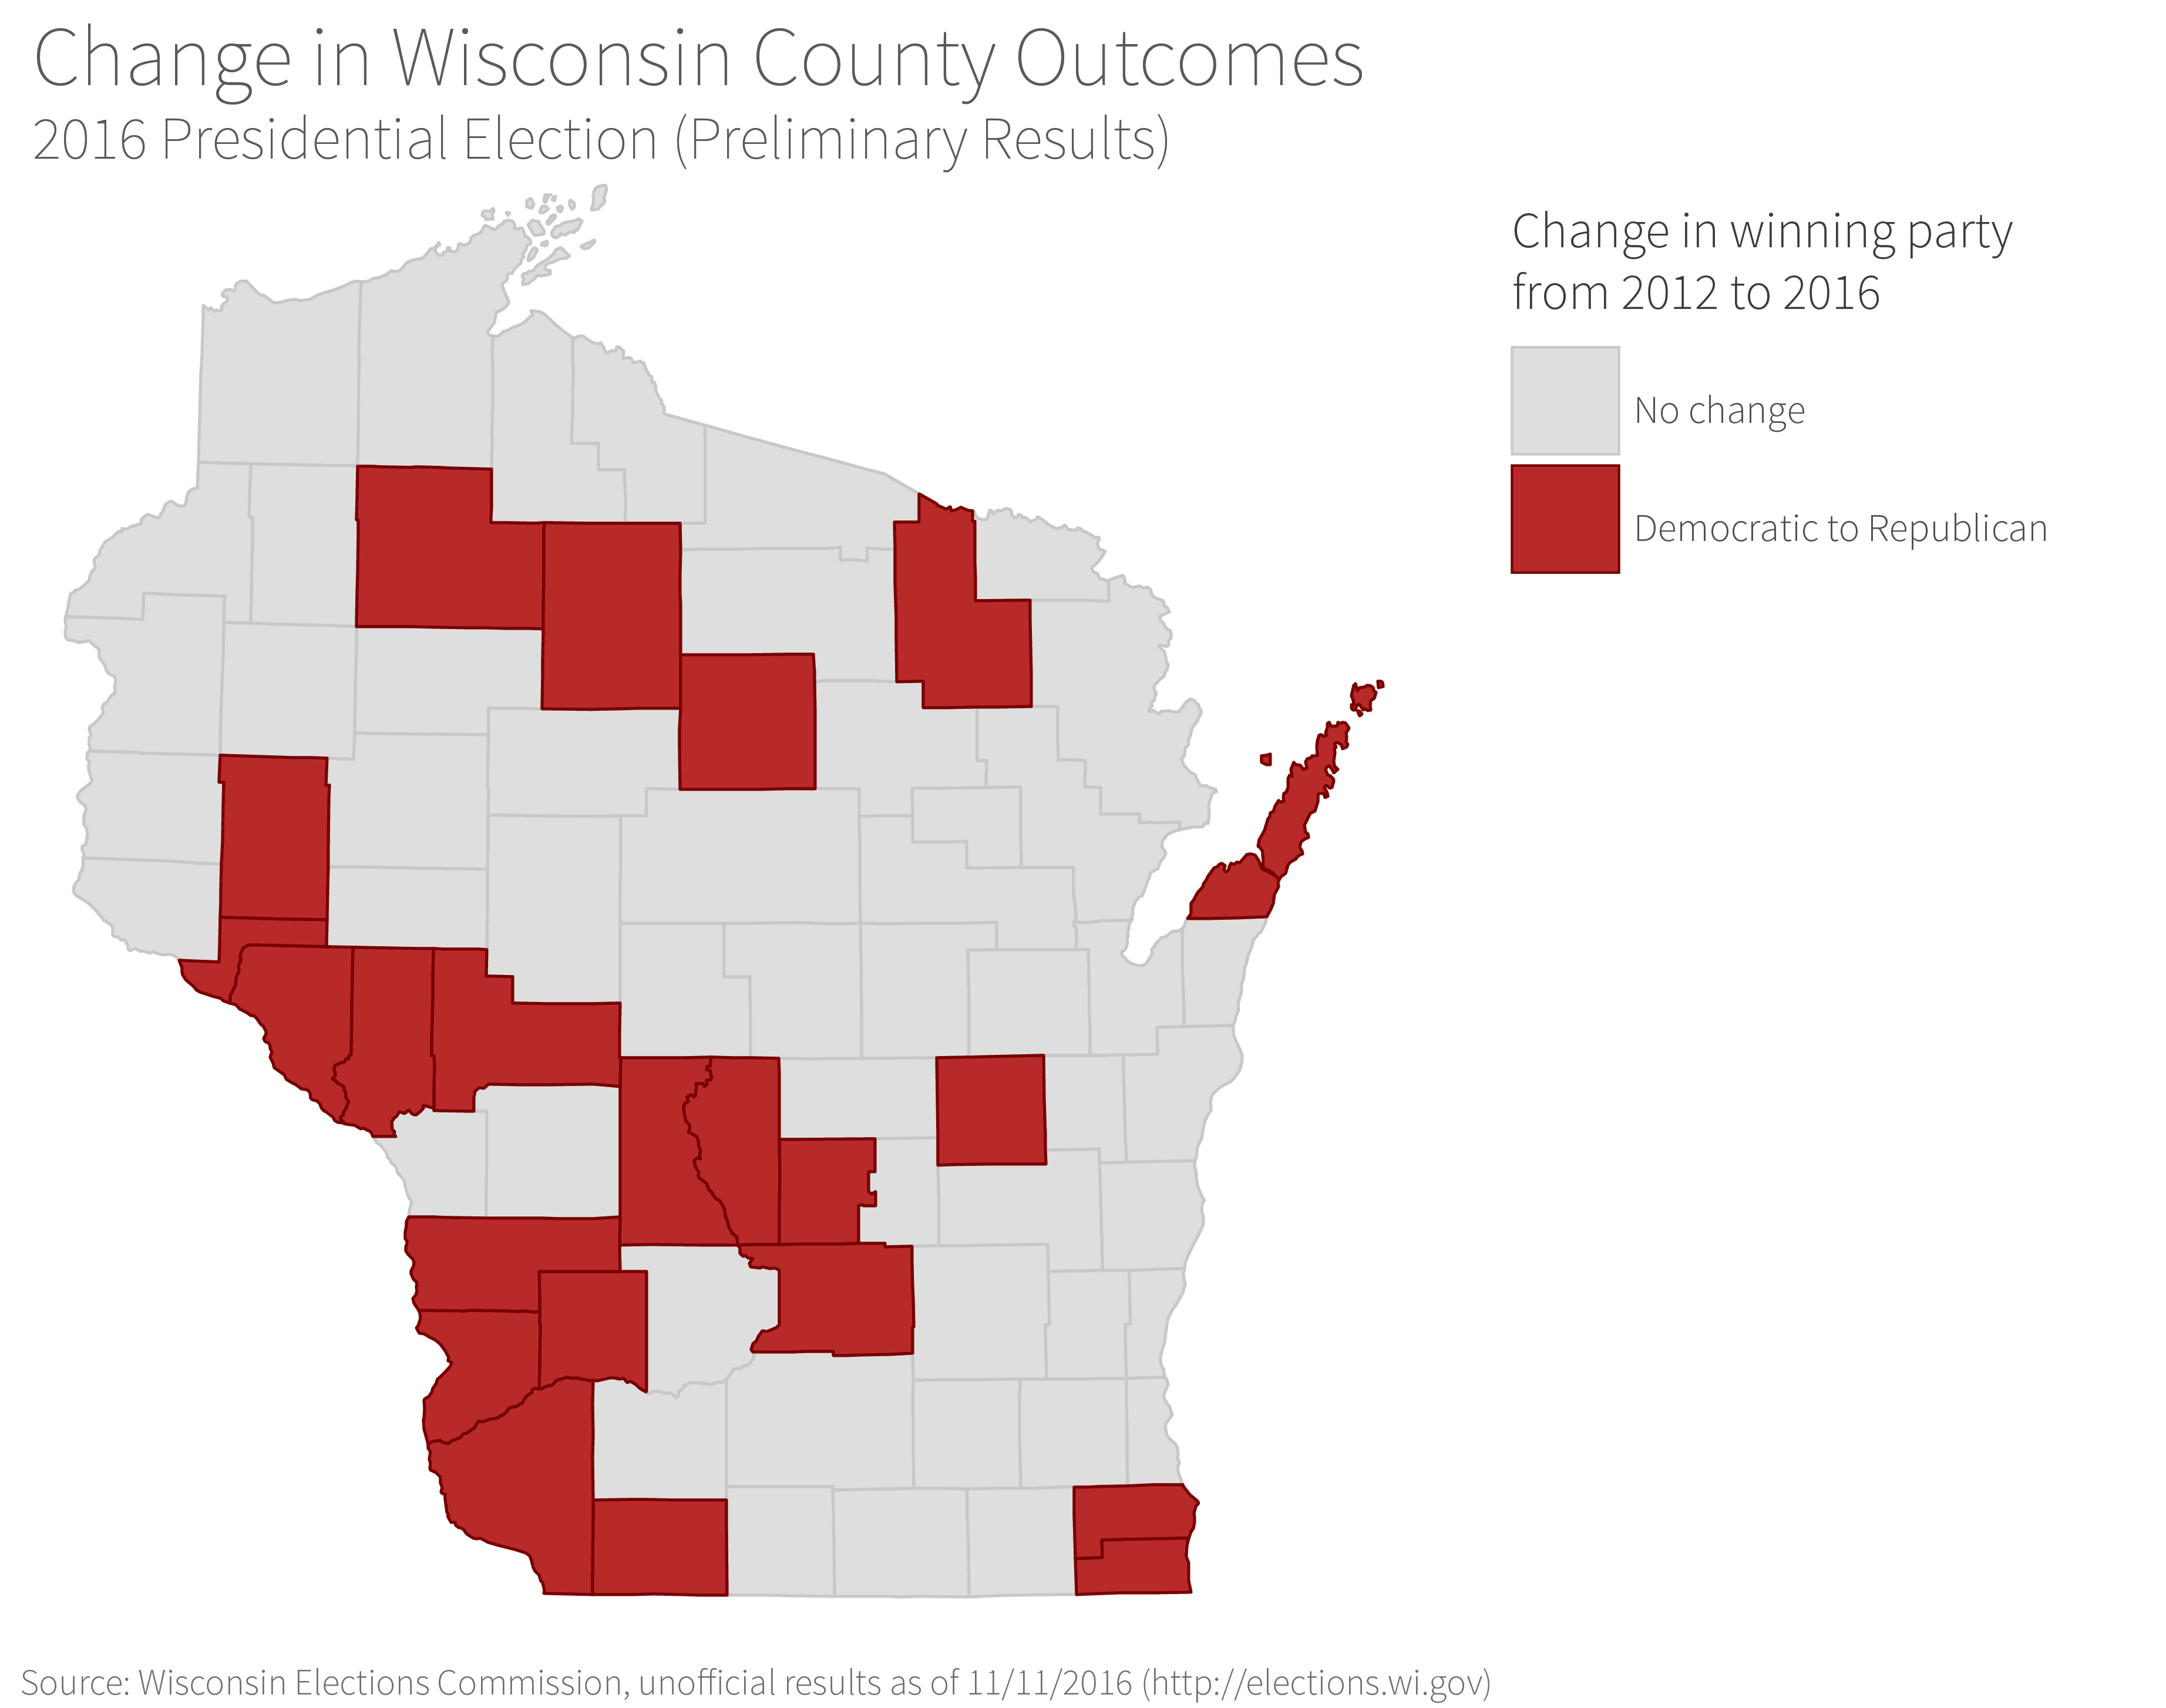 map showing change in election outcome (party) by Wisconsin county, 2012 to 2016 presidential elections